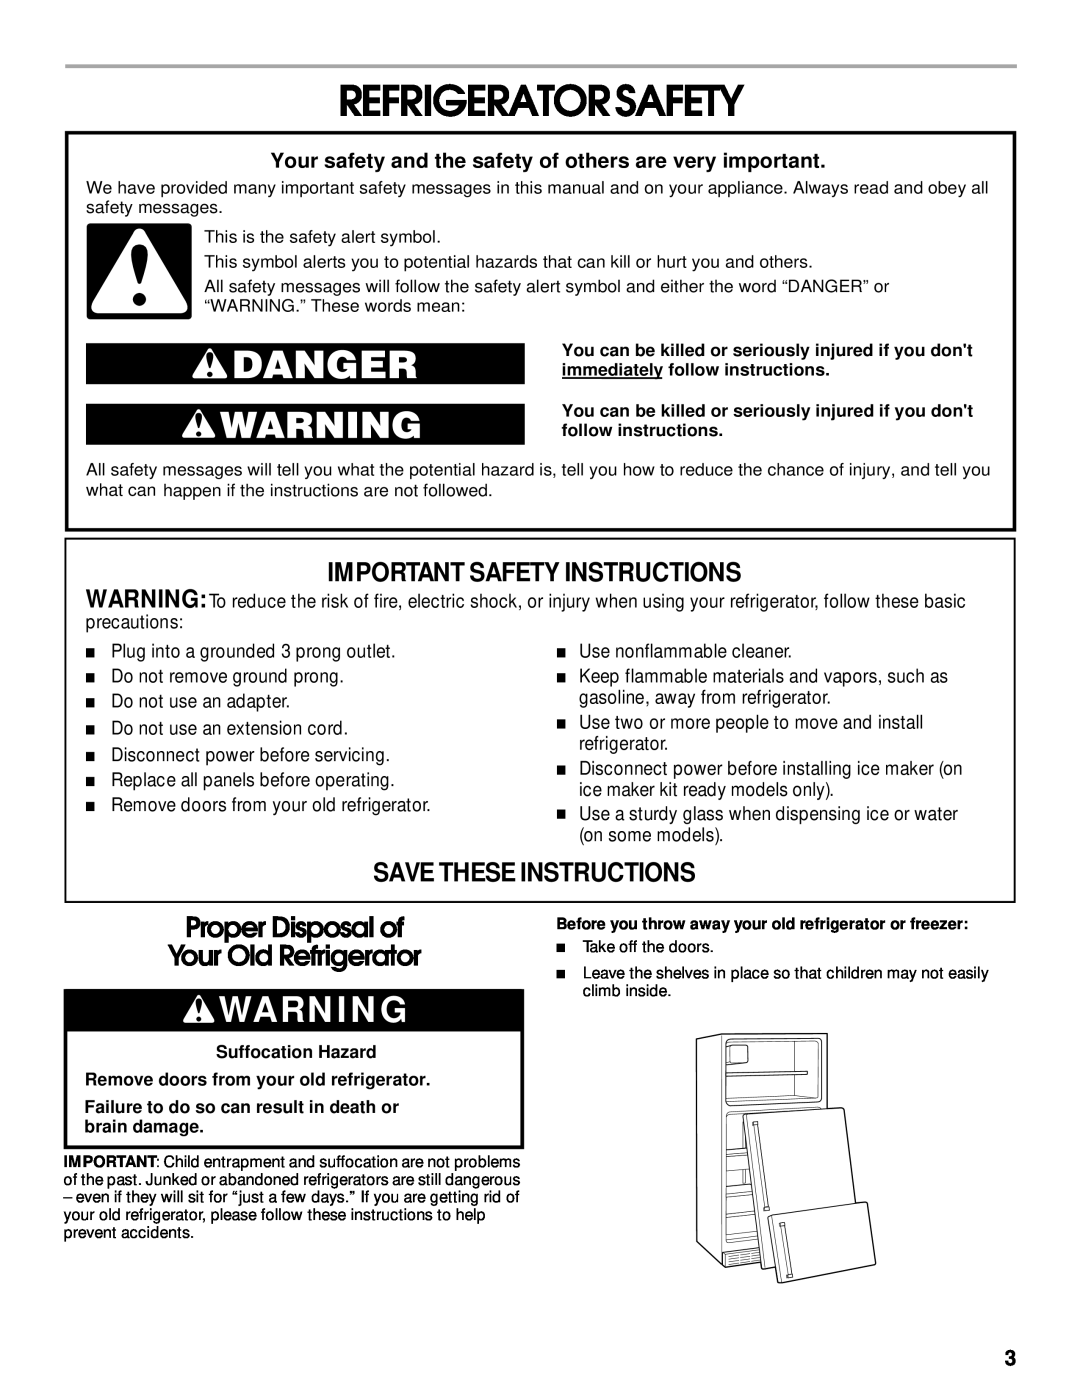 Whirlpool ST21PKXJW00 Refrigeratorsafety, Your safety and the safety of others are very important, Save These Instructions 